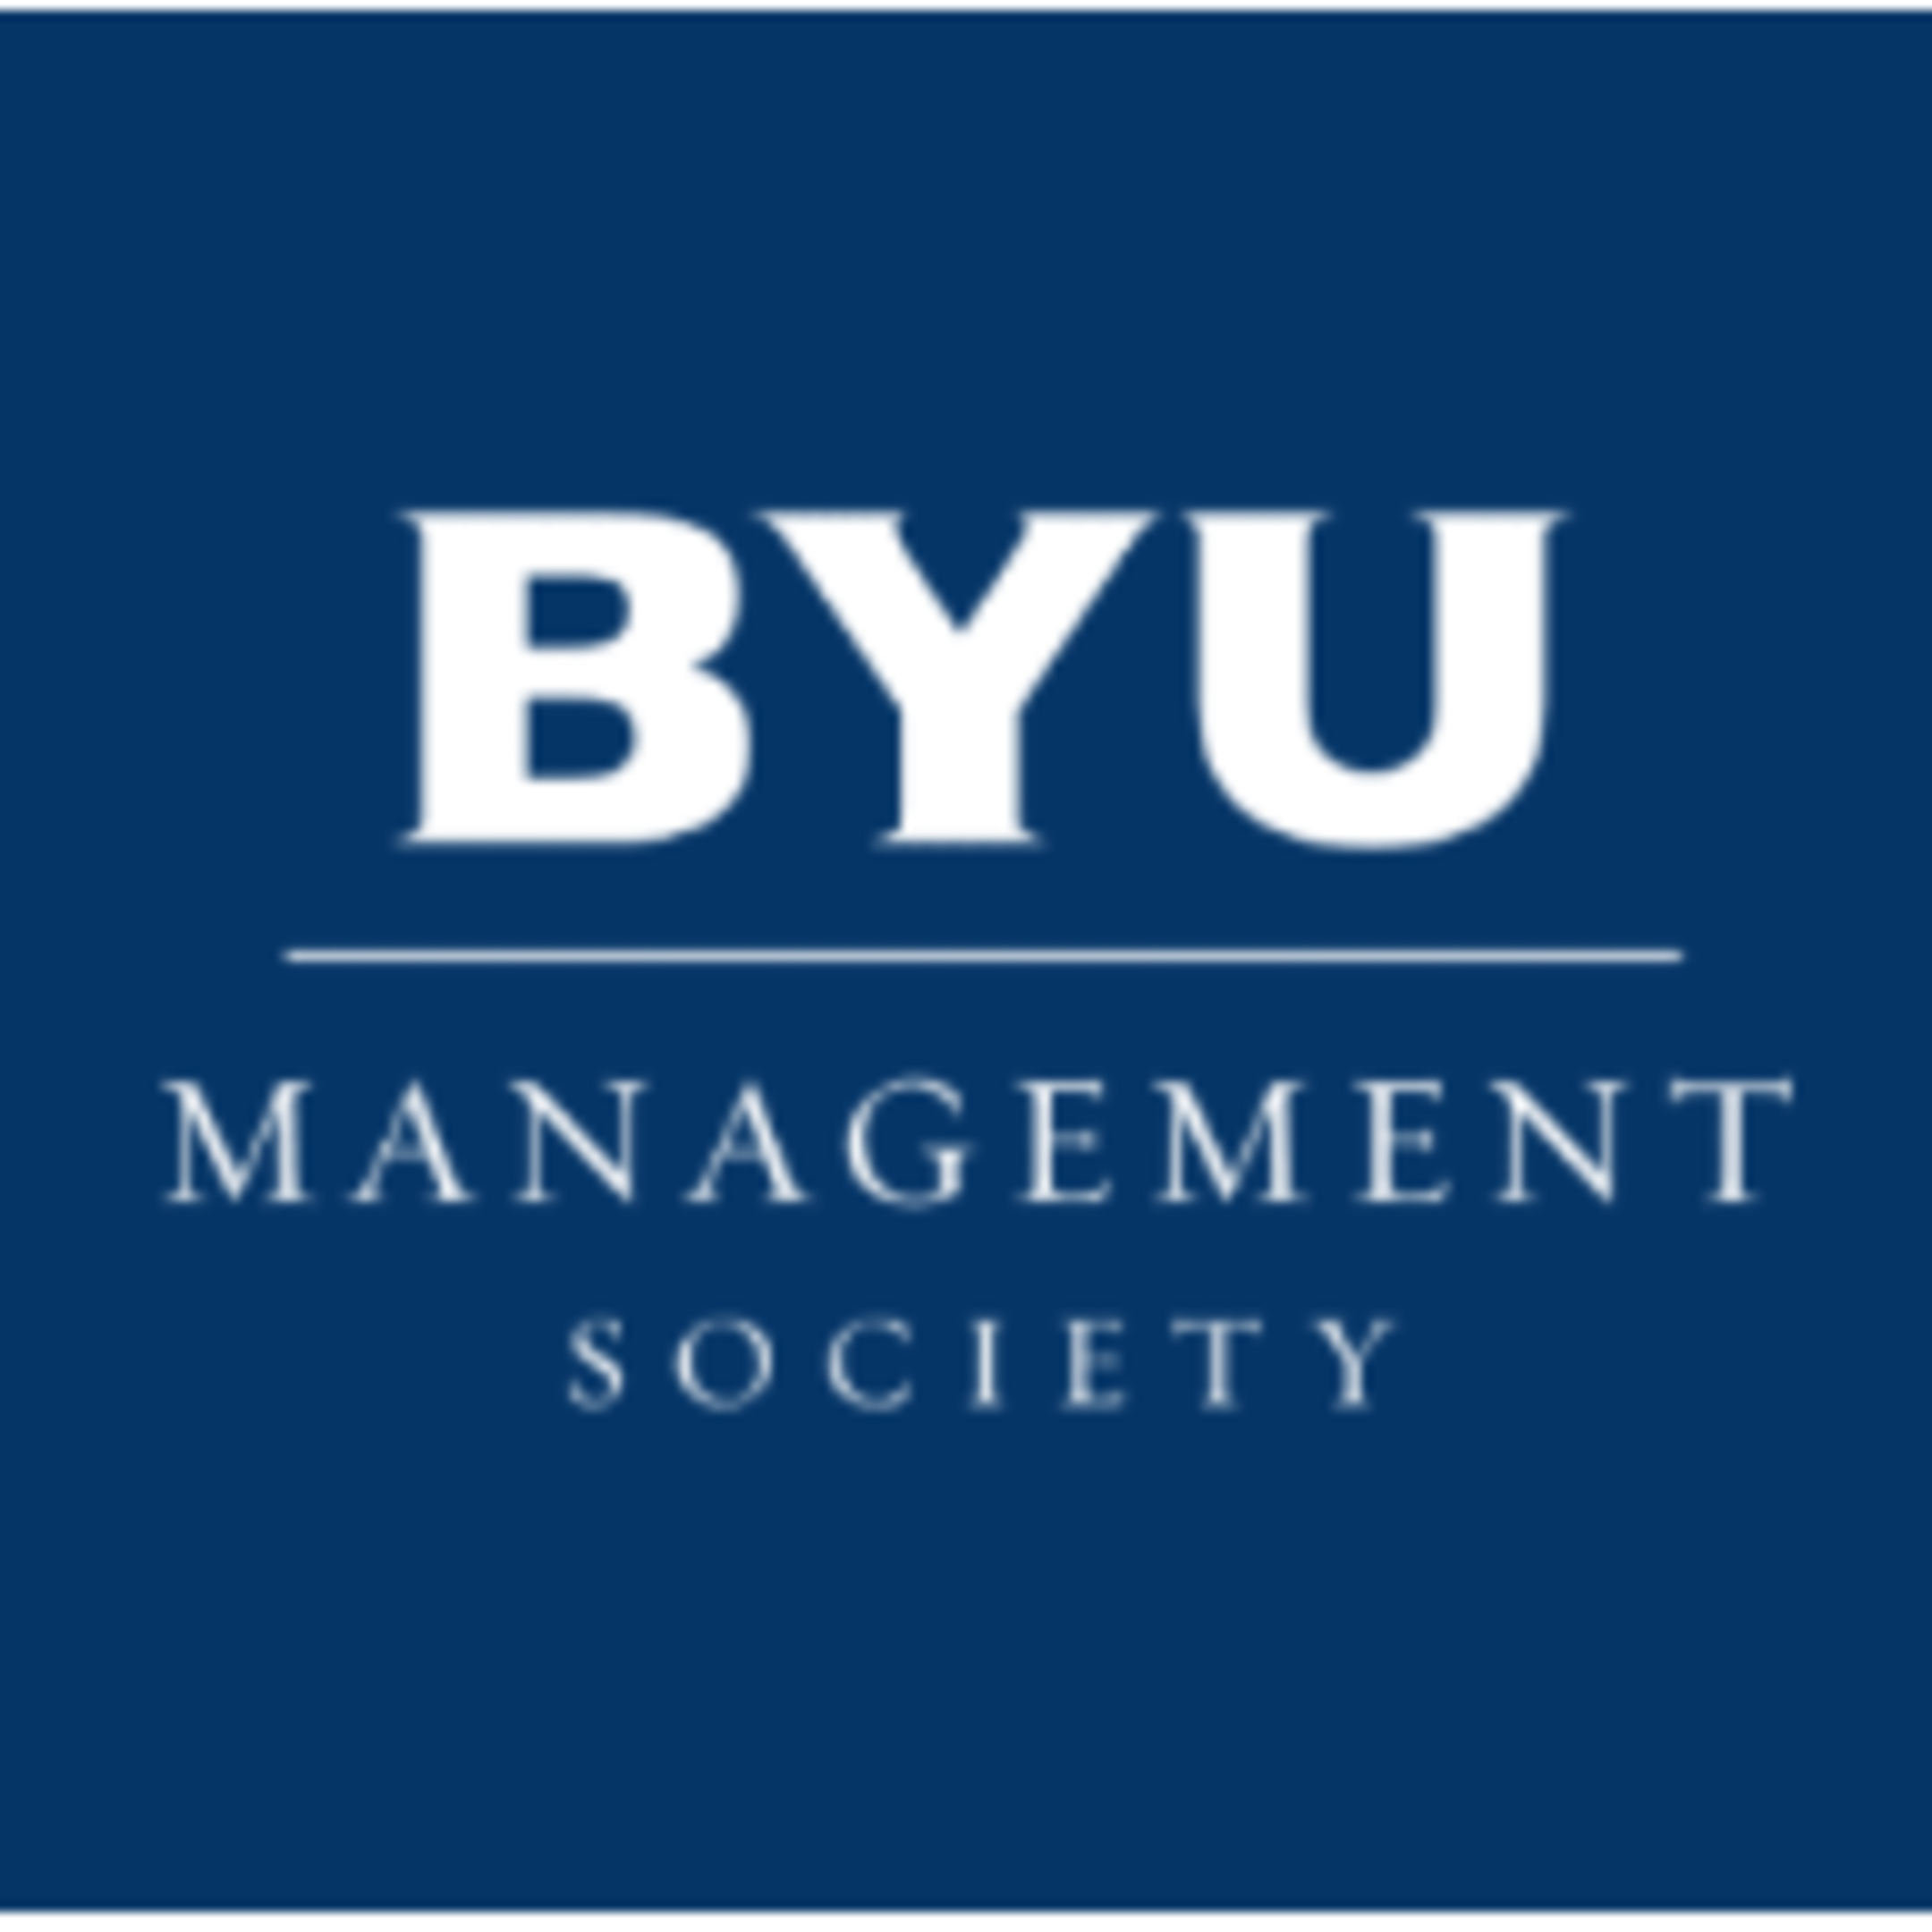 See March Management Society Luncheon with David Nixon at BYU